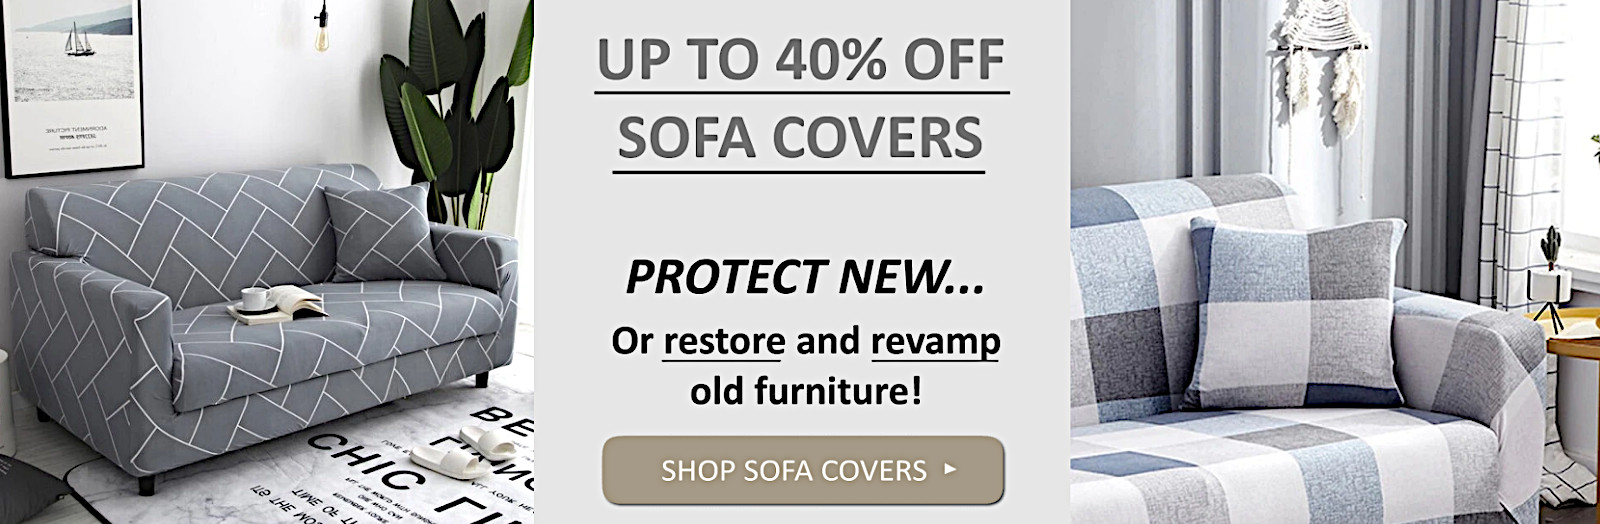 sofa covers special offer